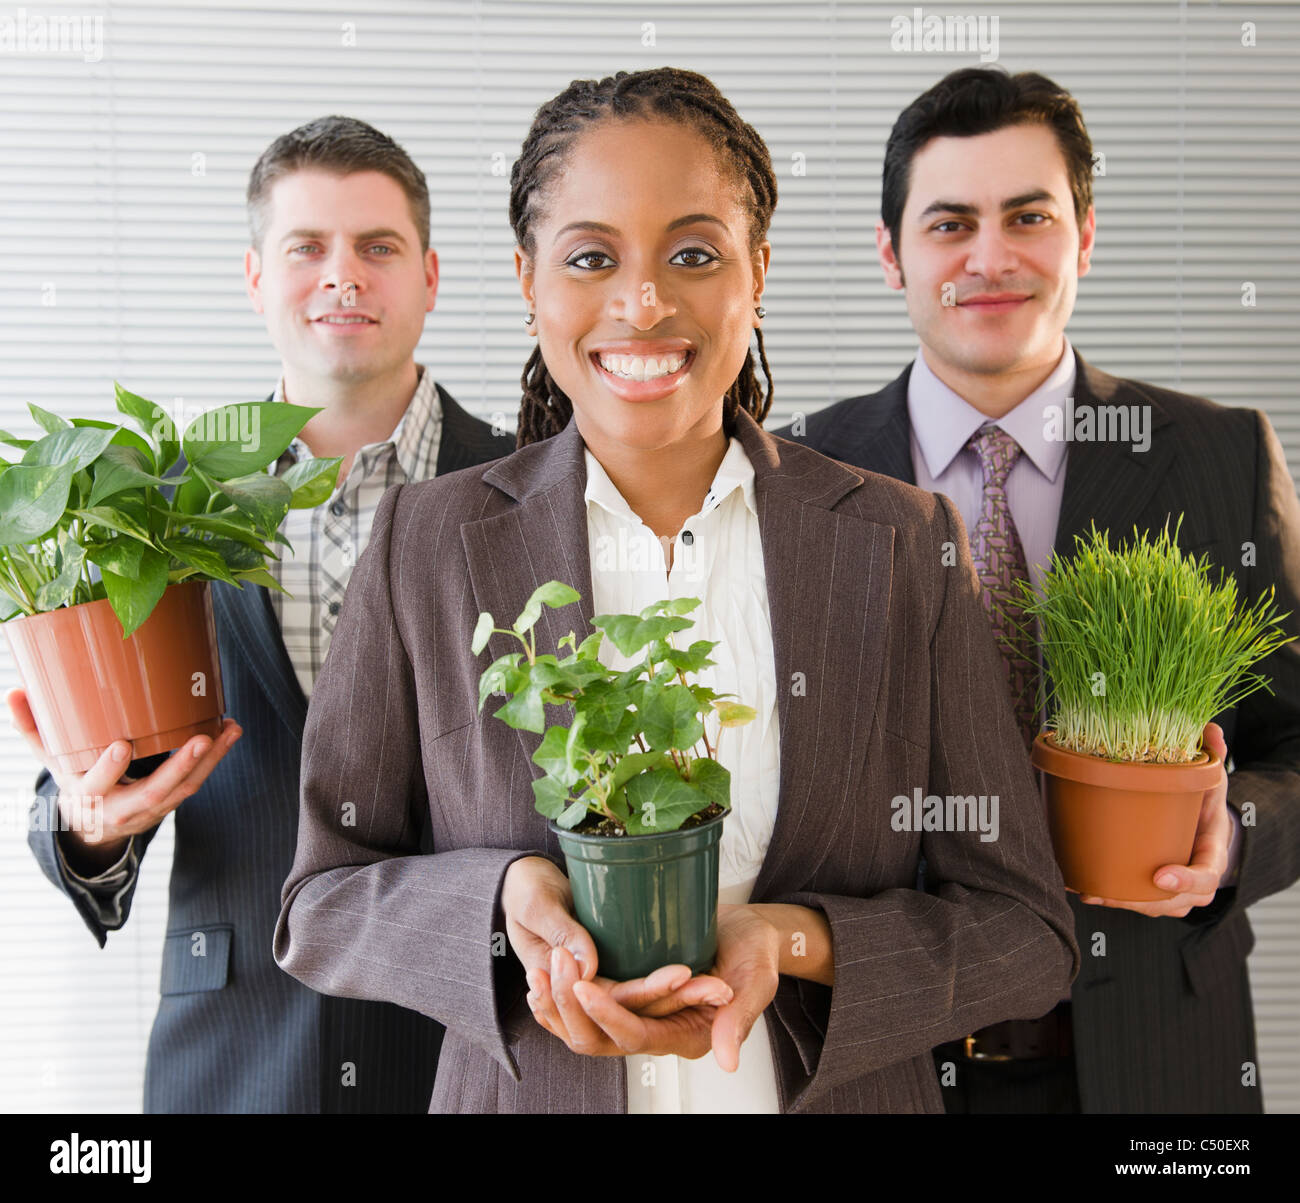 Business people holding potted plants Stock Photo